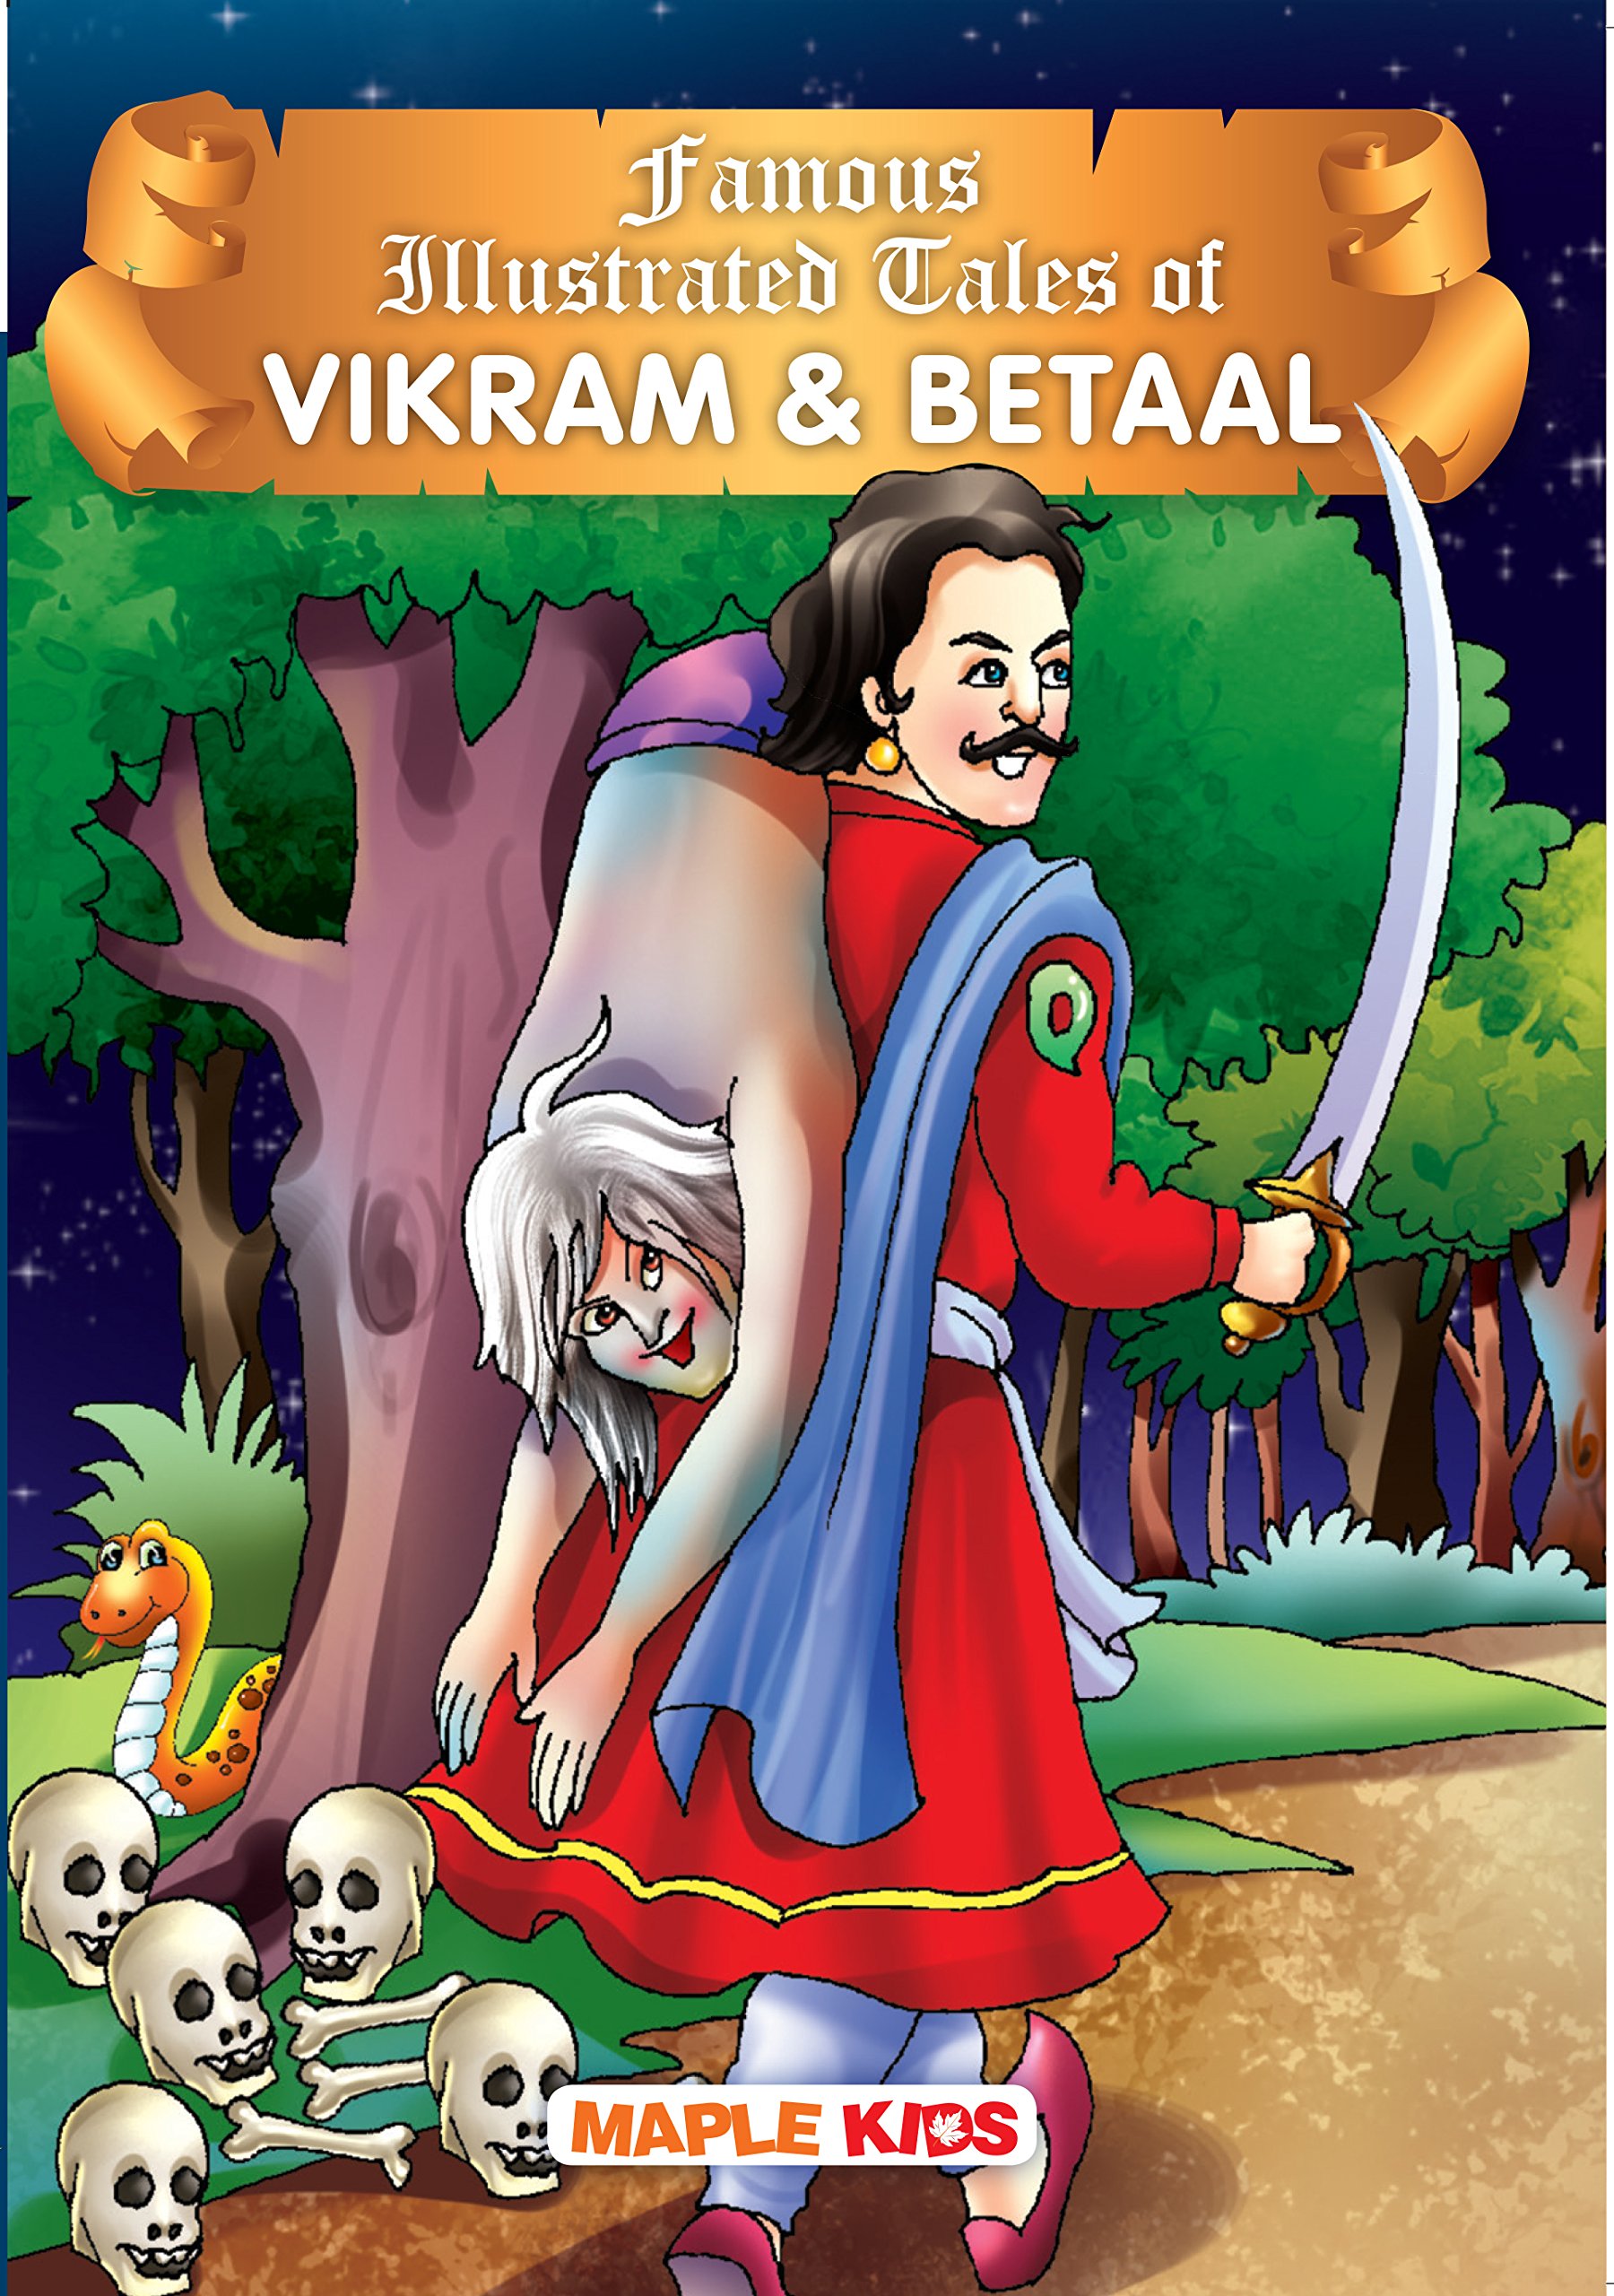 book review of vikram and betal